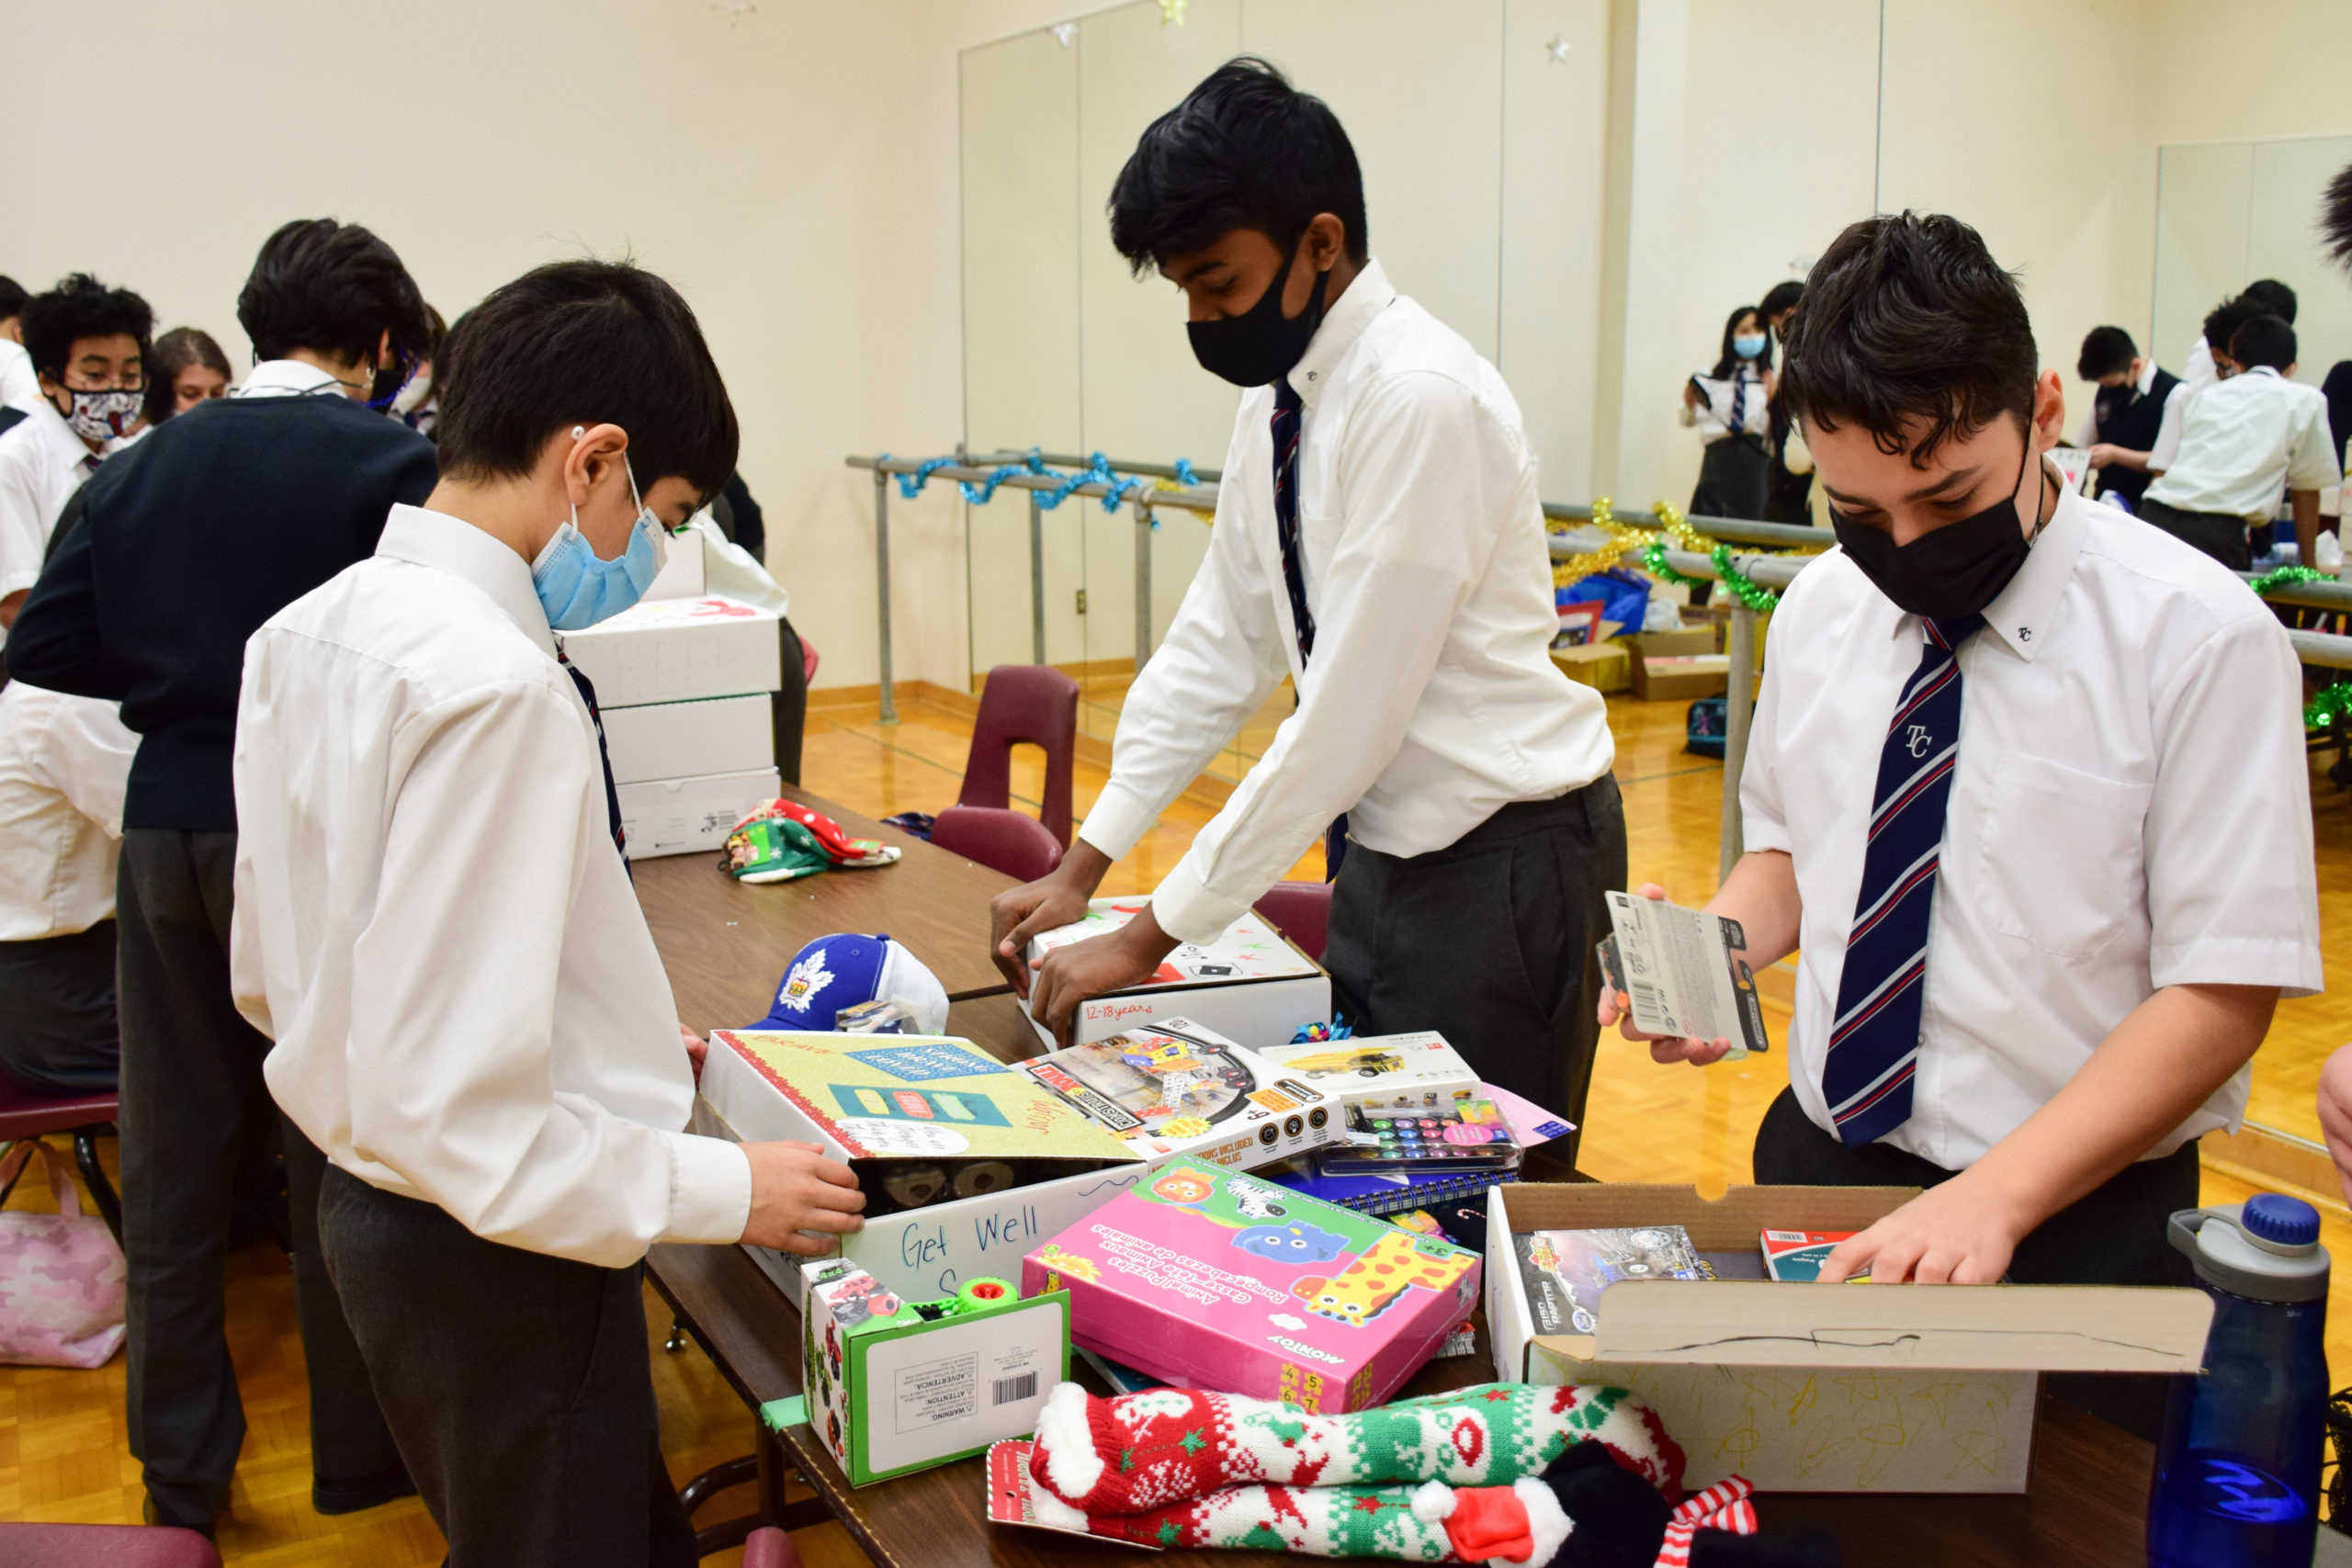 Elementary students packing gift boxes